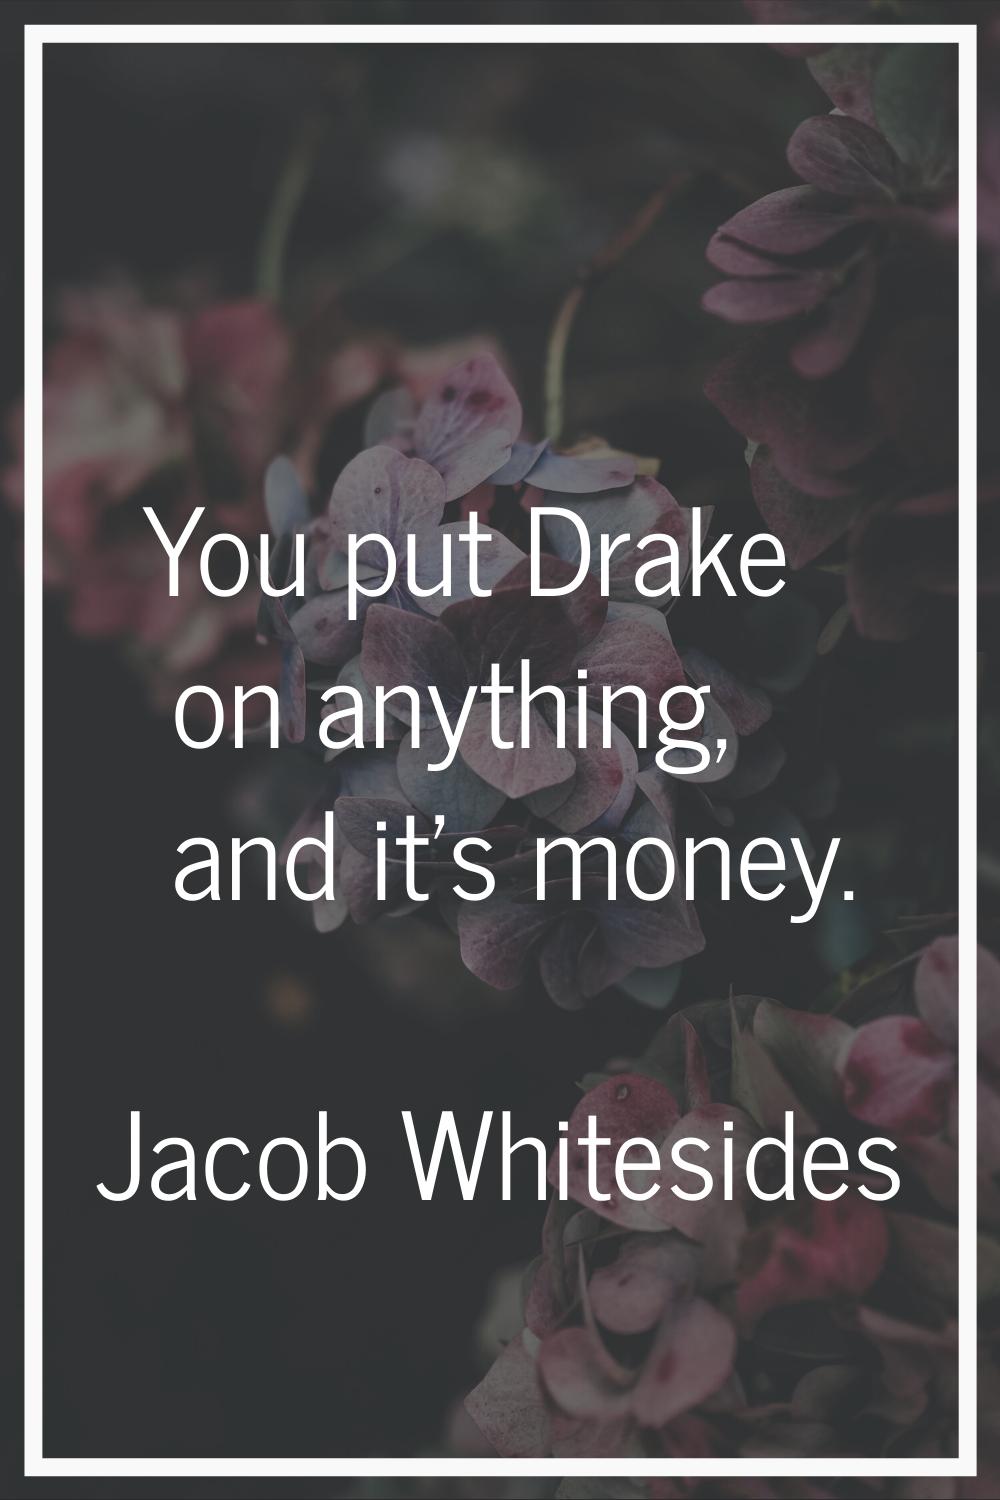 You put Drake on anything, and it's money.